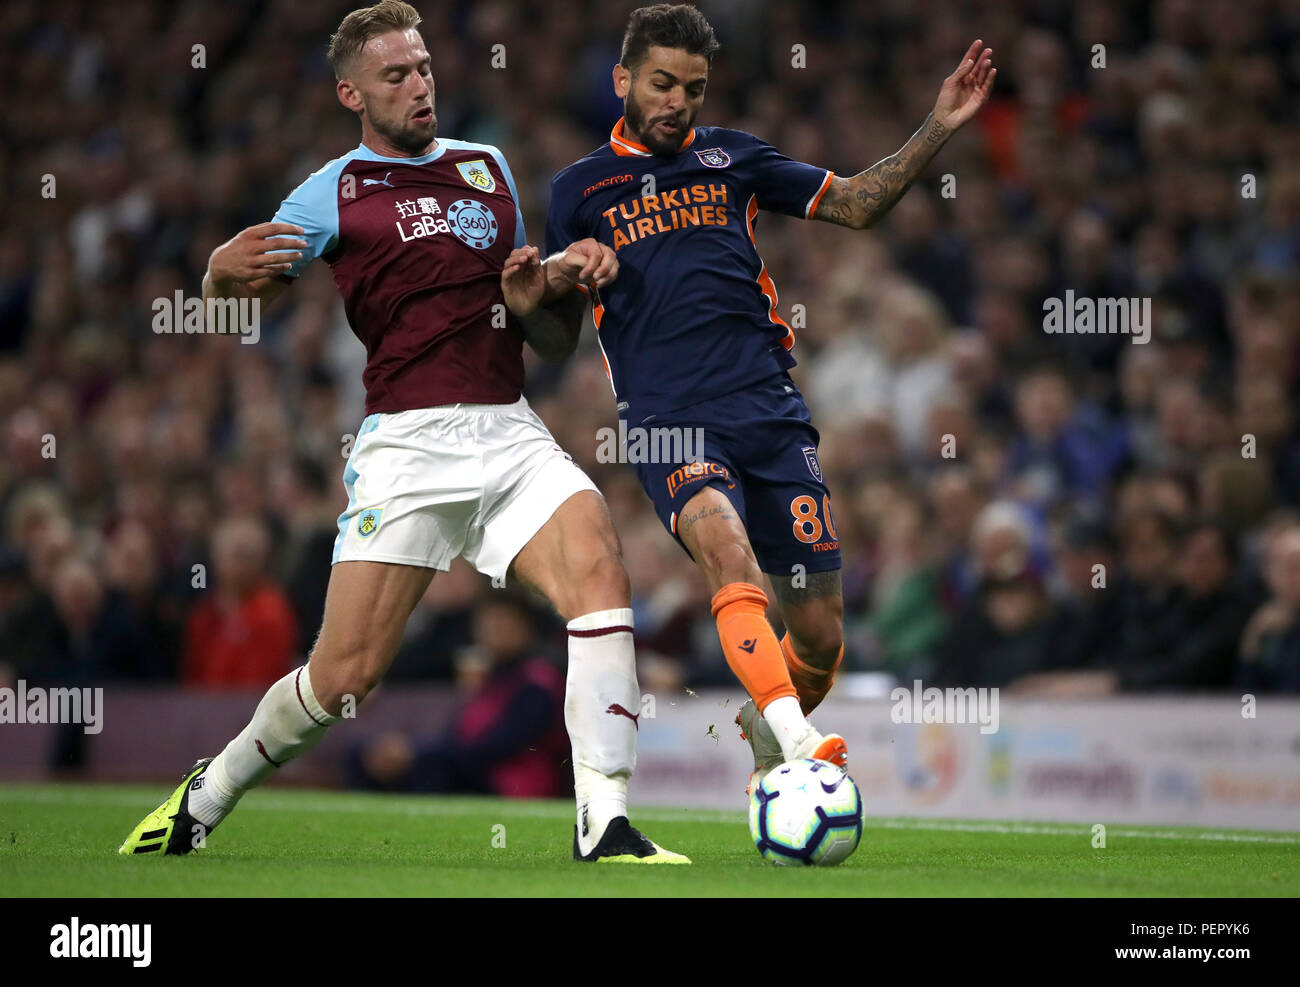 Burnley's Charlie Taylor (left) and Istanbul Basaksehir's Junior Caicara battle for the ball during the UEFA Europa League, Third Qualifying Round match at Turf Moor, Burnley. Stock Photo